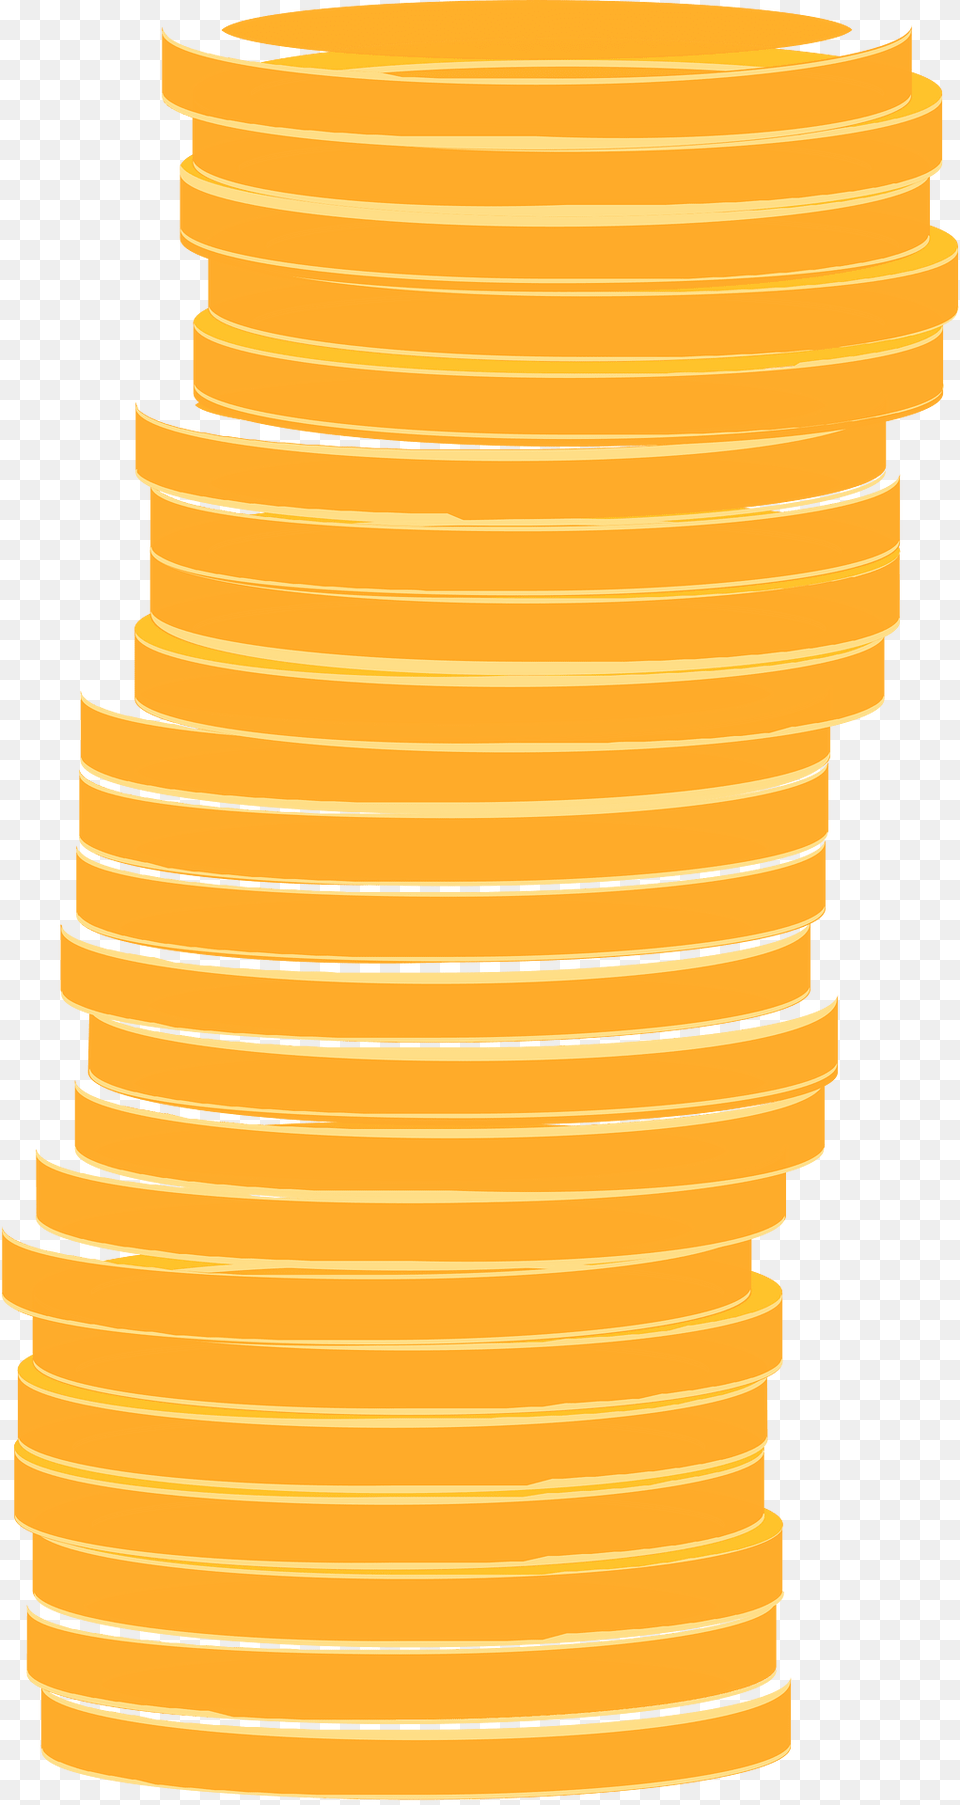 Tower Of Coins Clipart, Blade, Cooking, Knife, Sliced Png